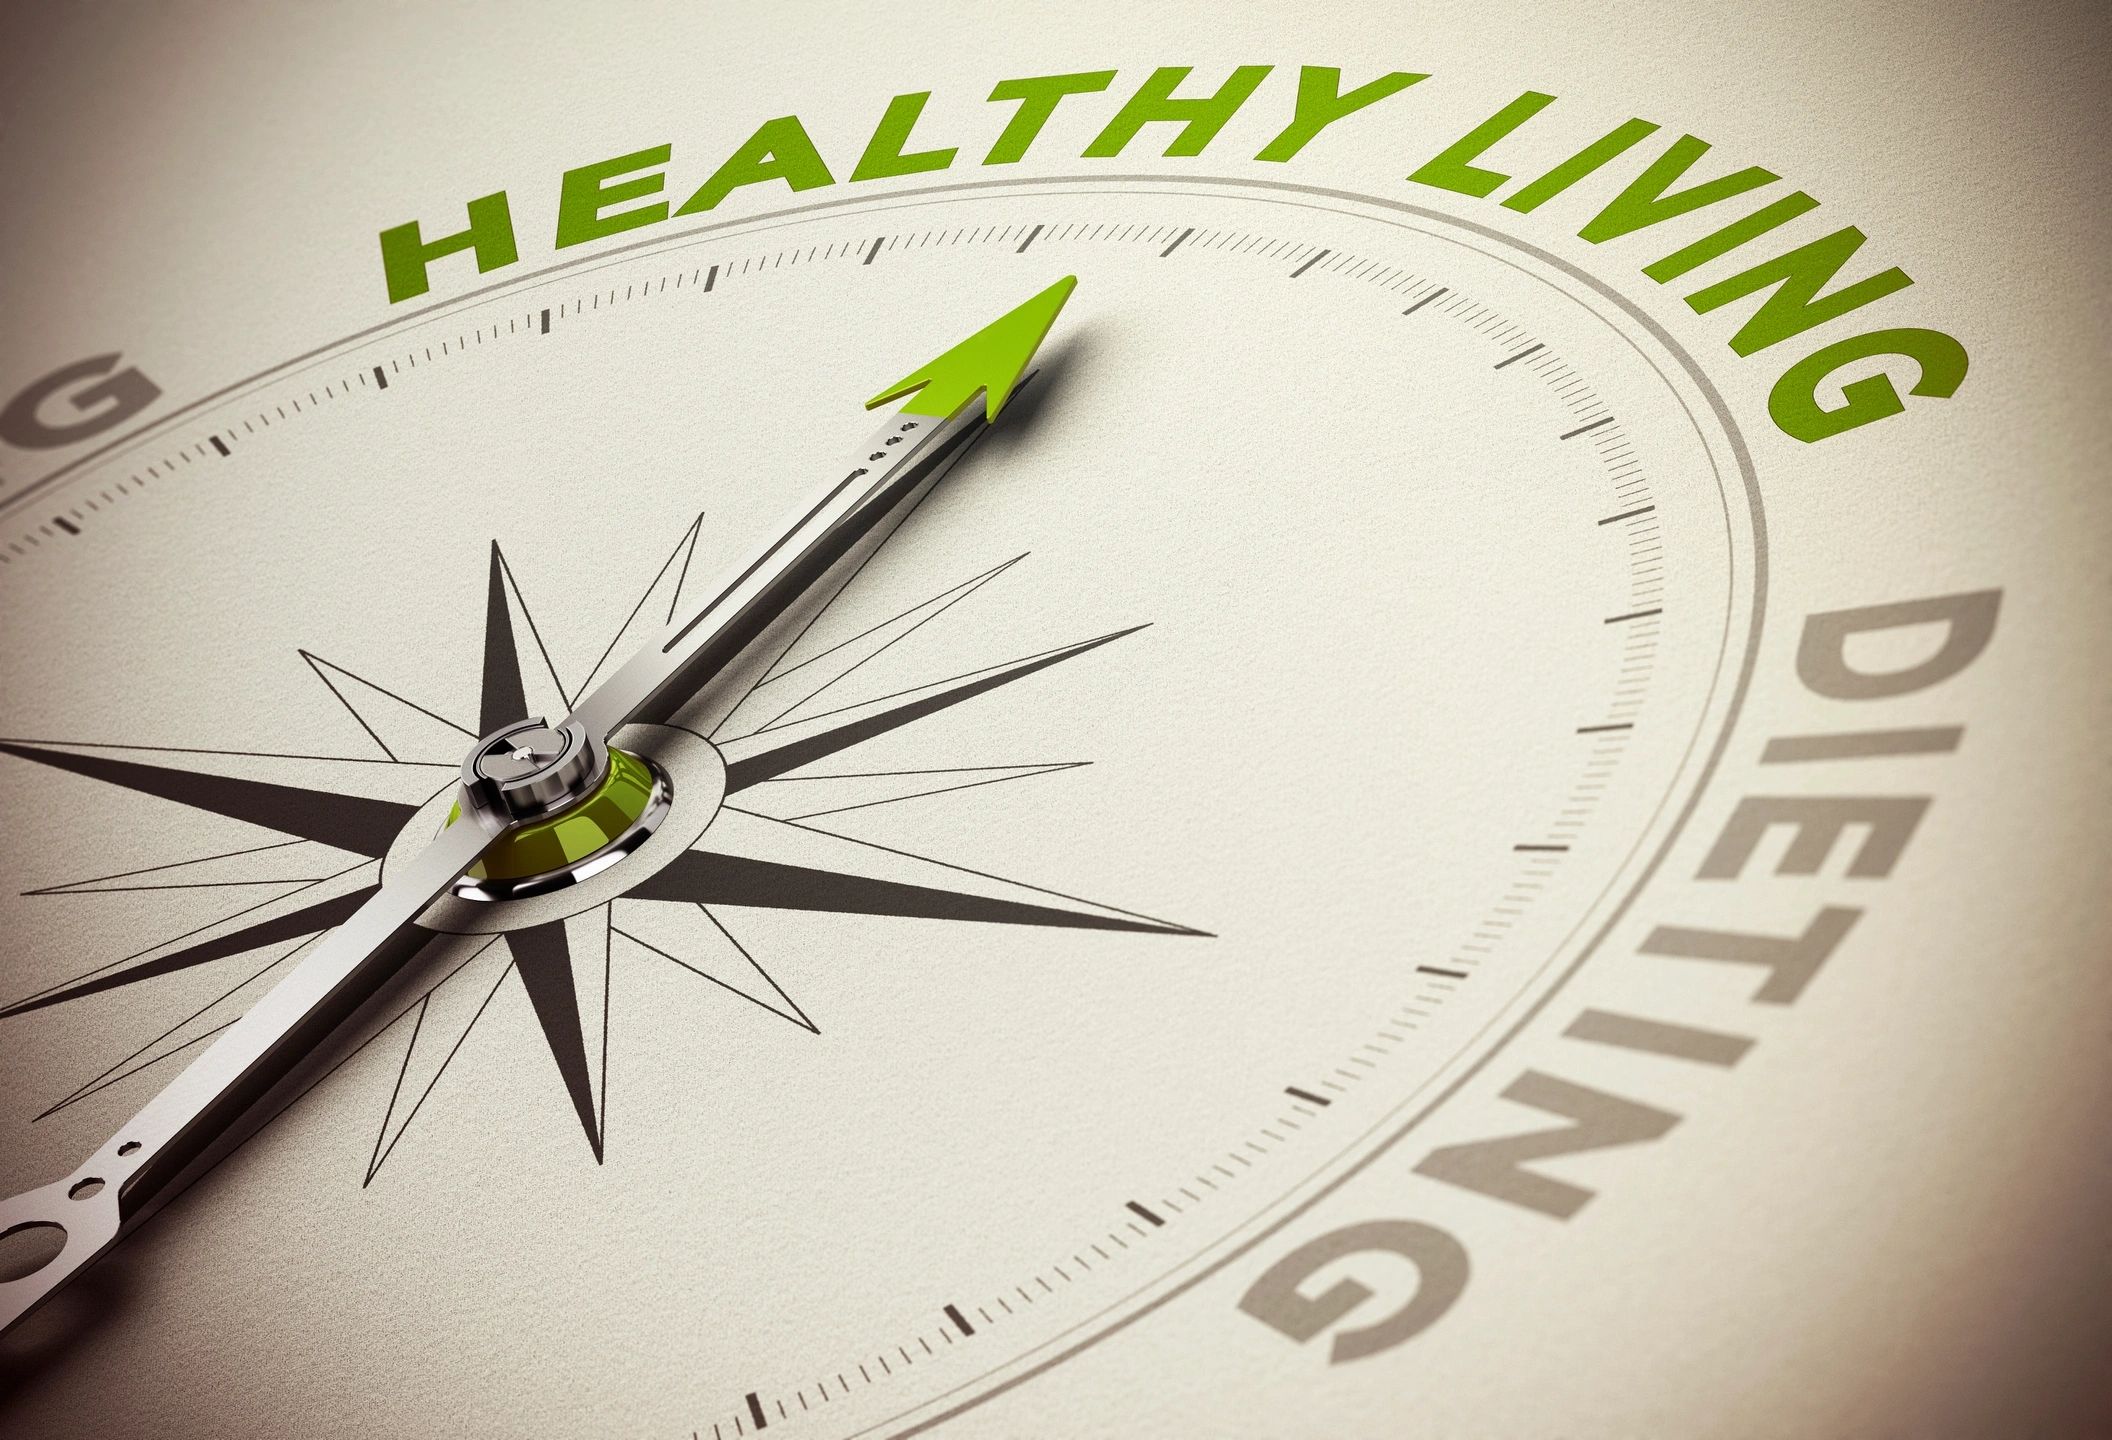 Green and white clock with minute hand pointing to green "Healthy Living" lettering